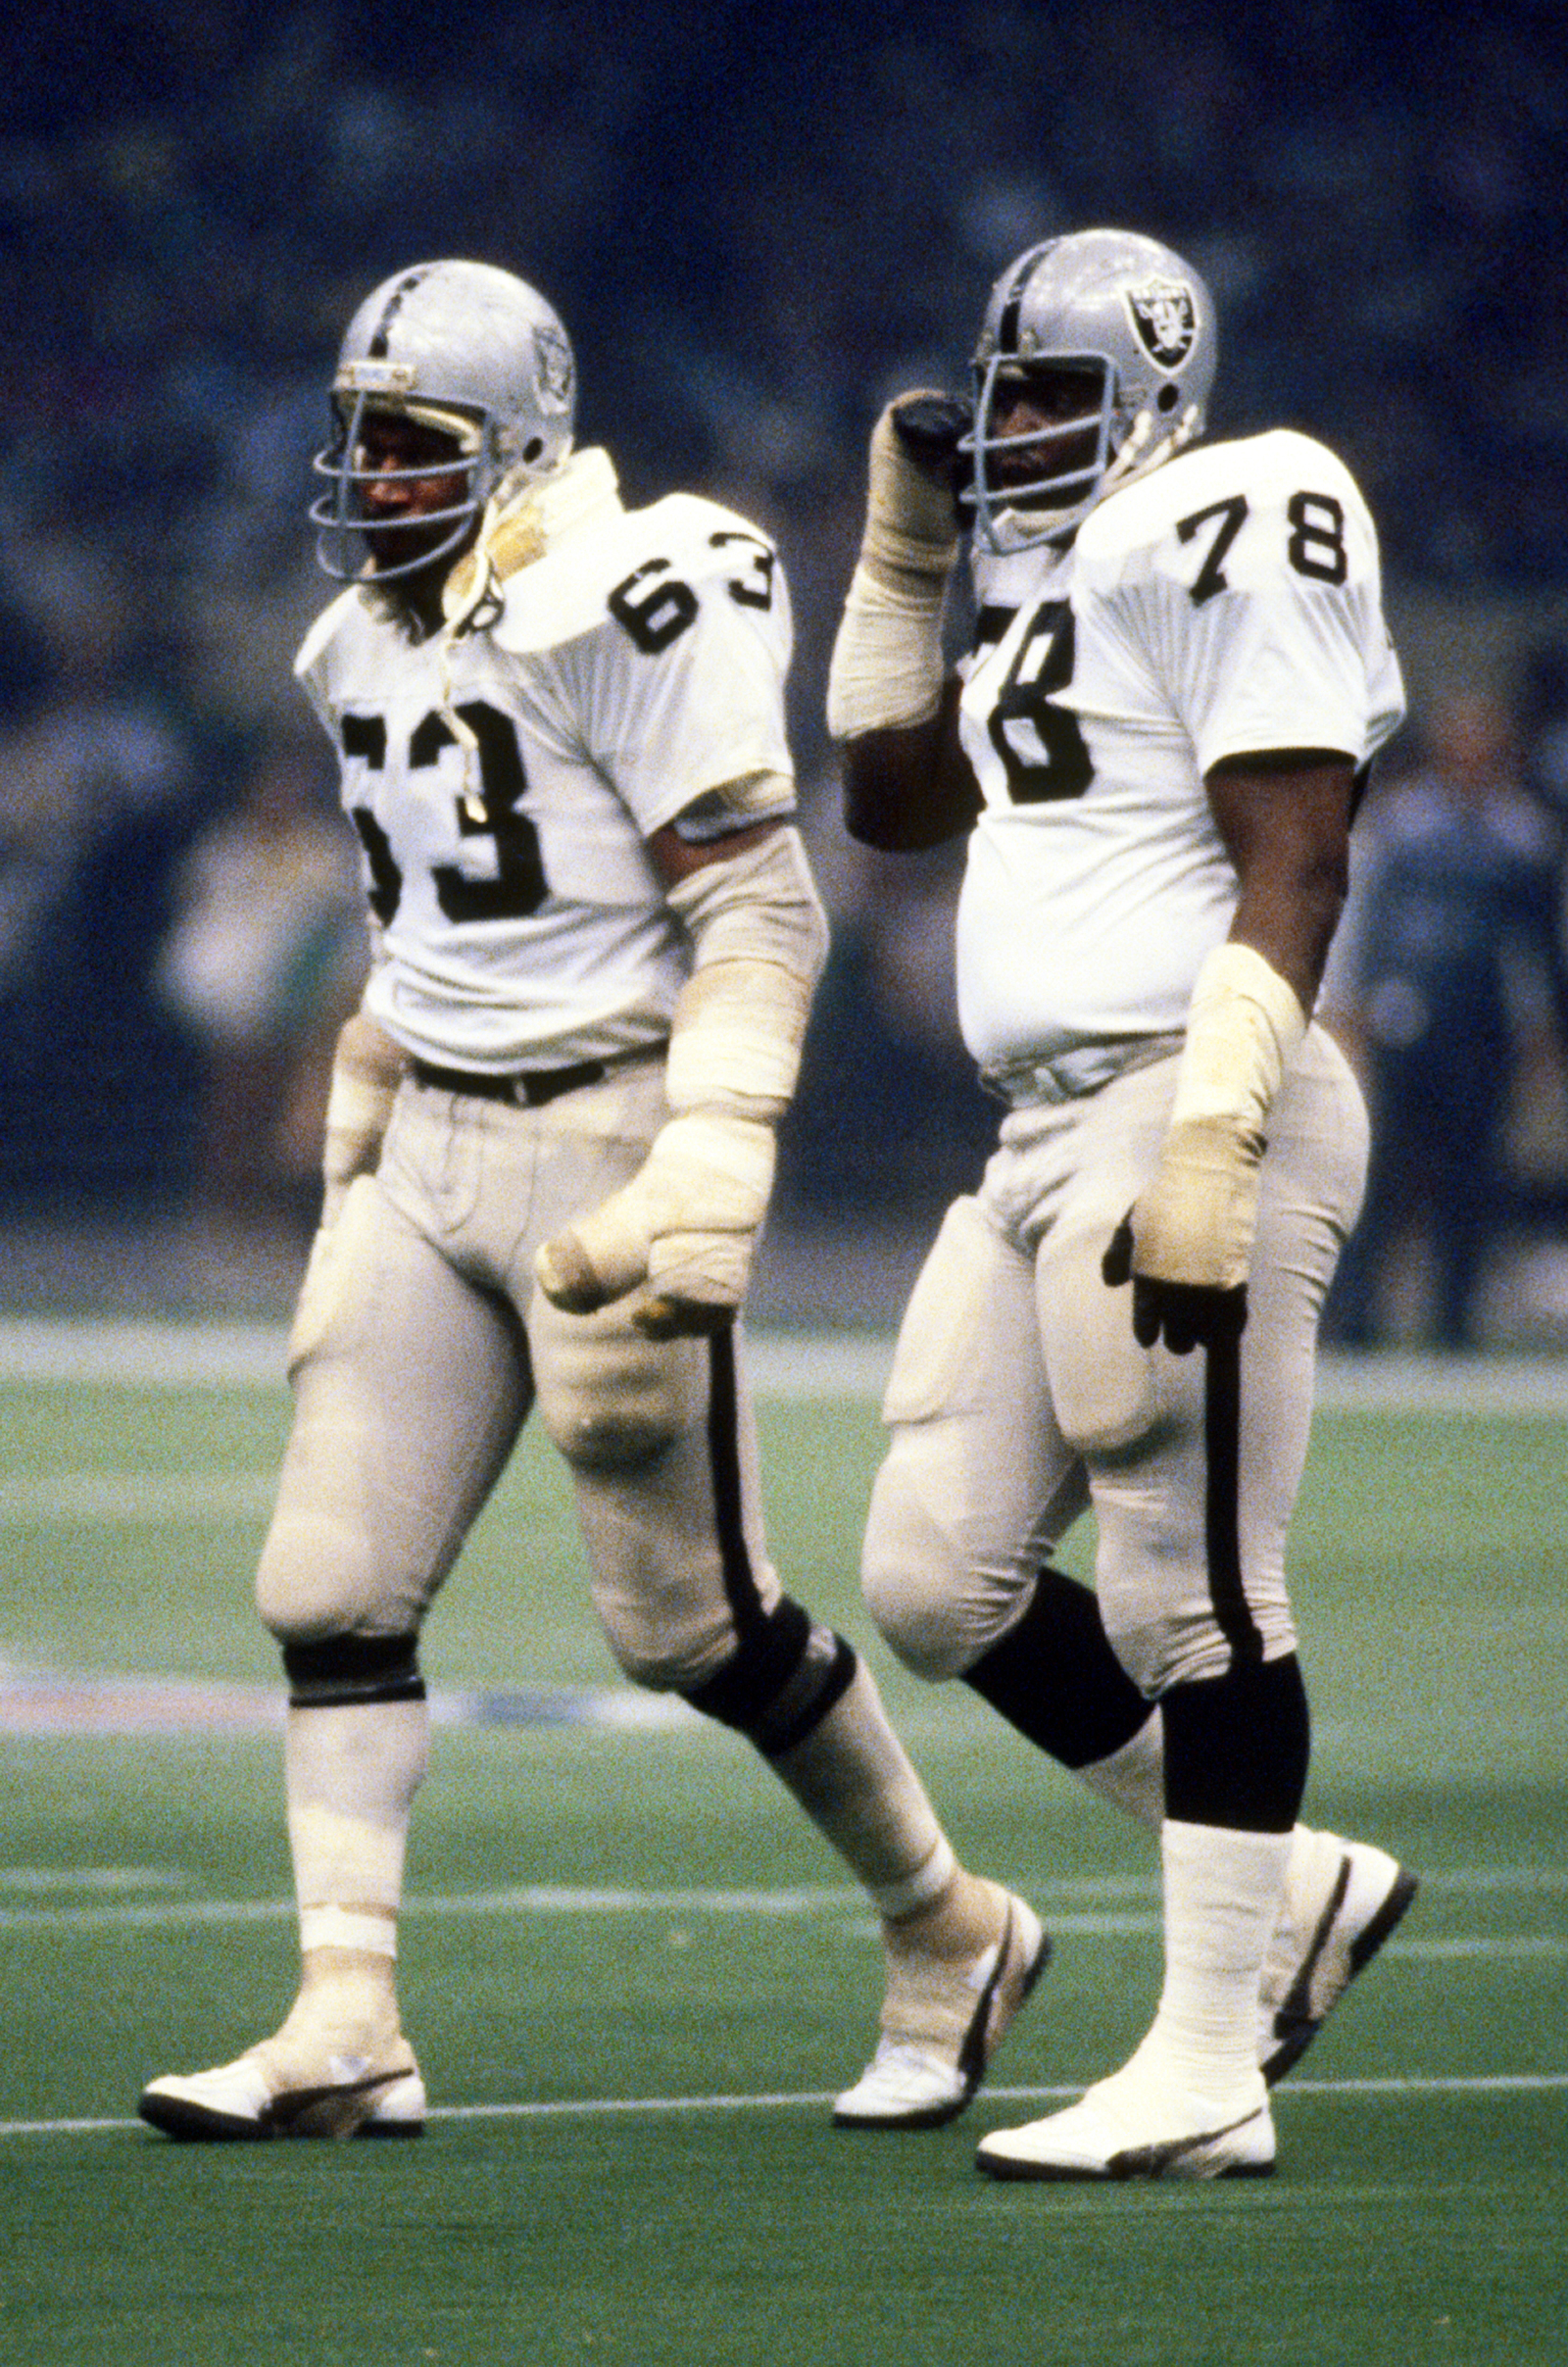 Raiders: Ranking the top 5 offensive linemen in franchise history